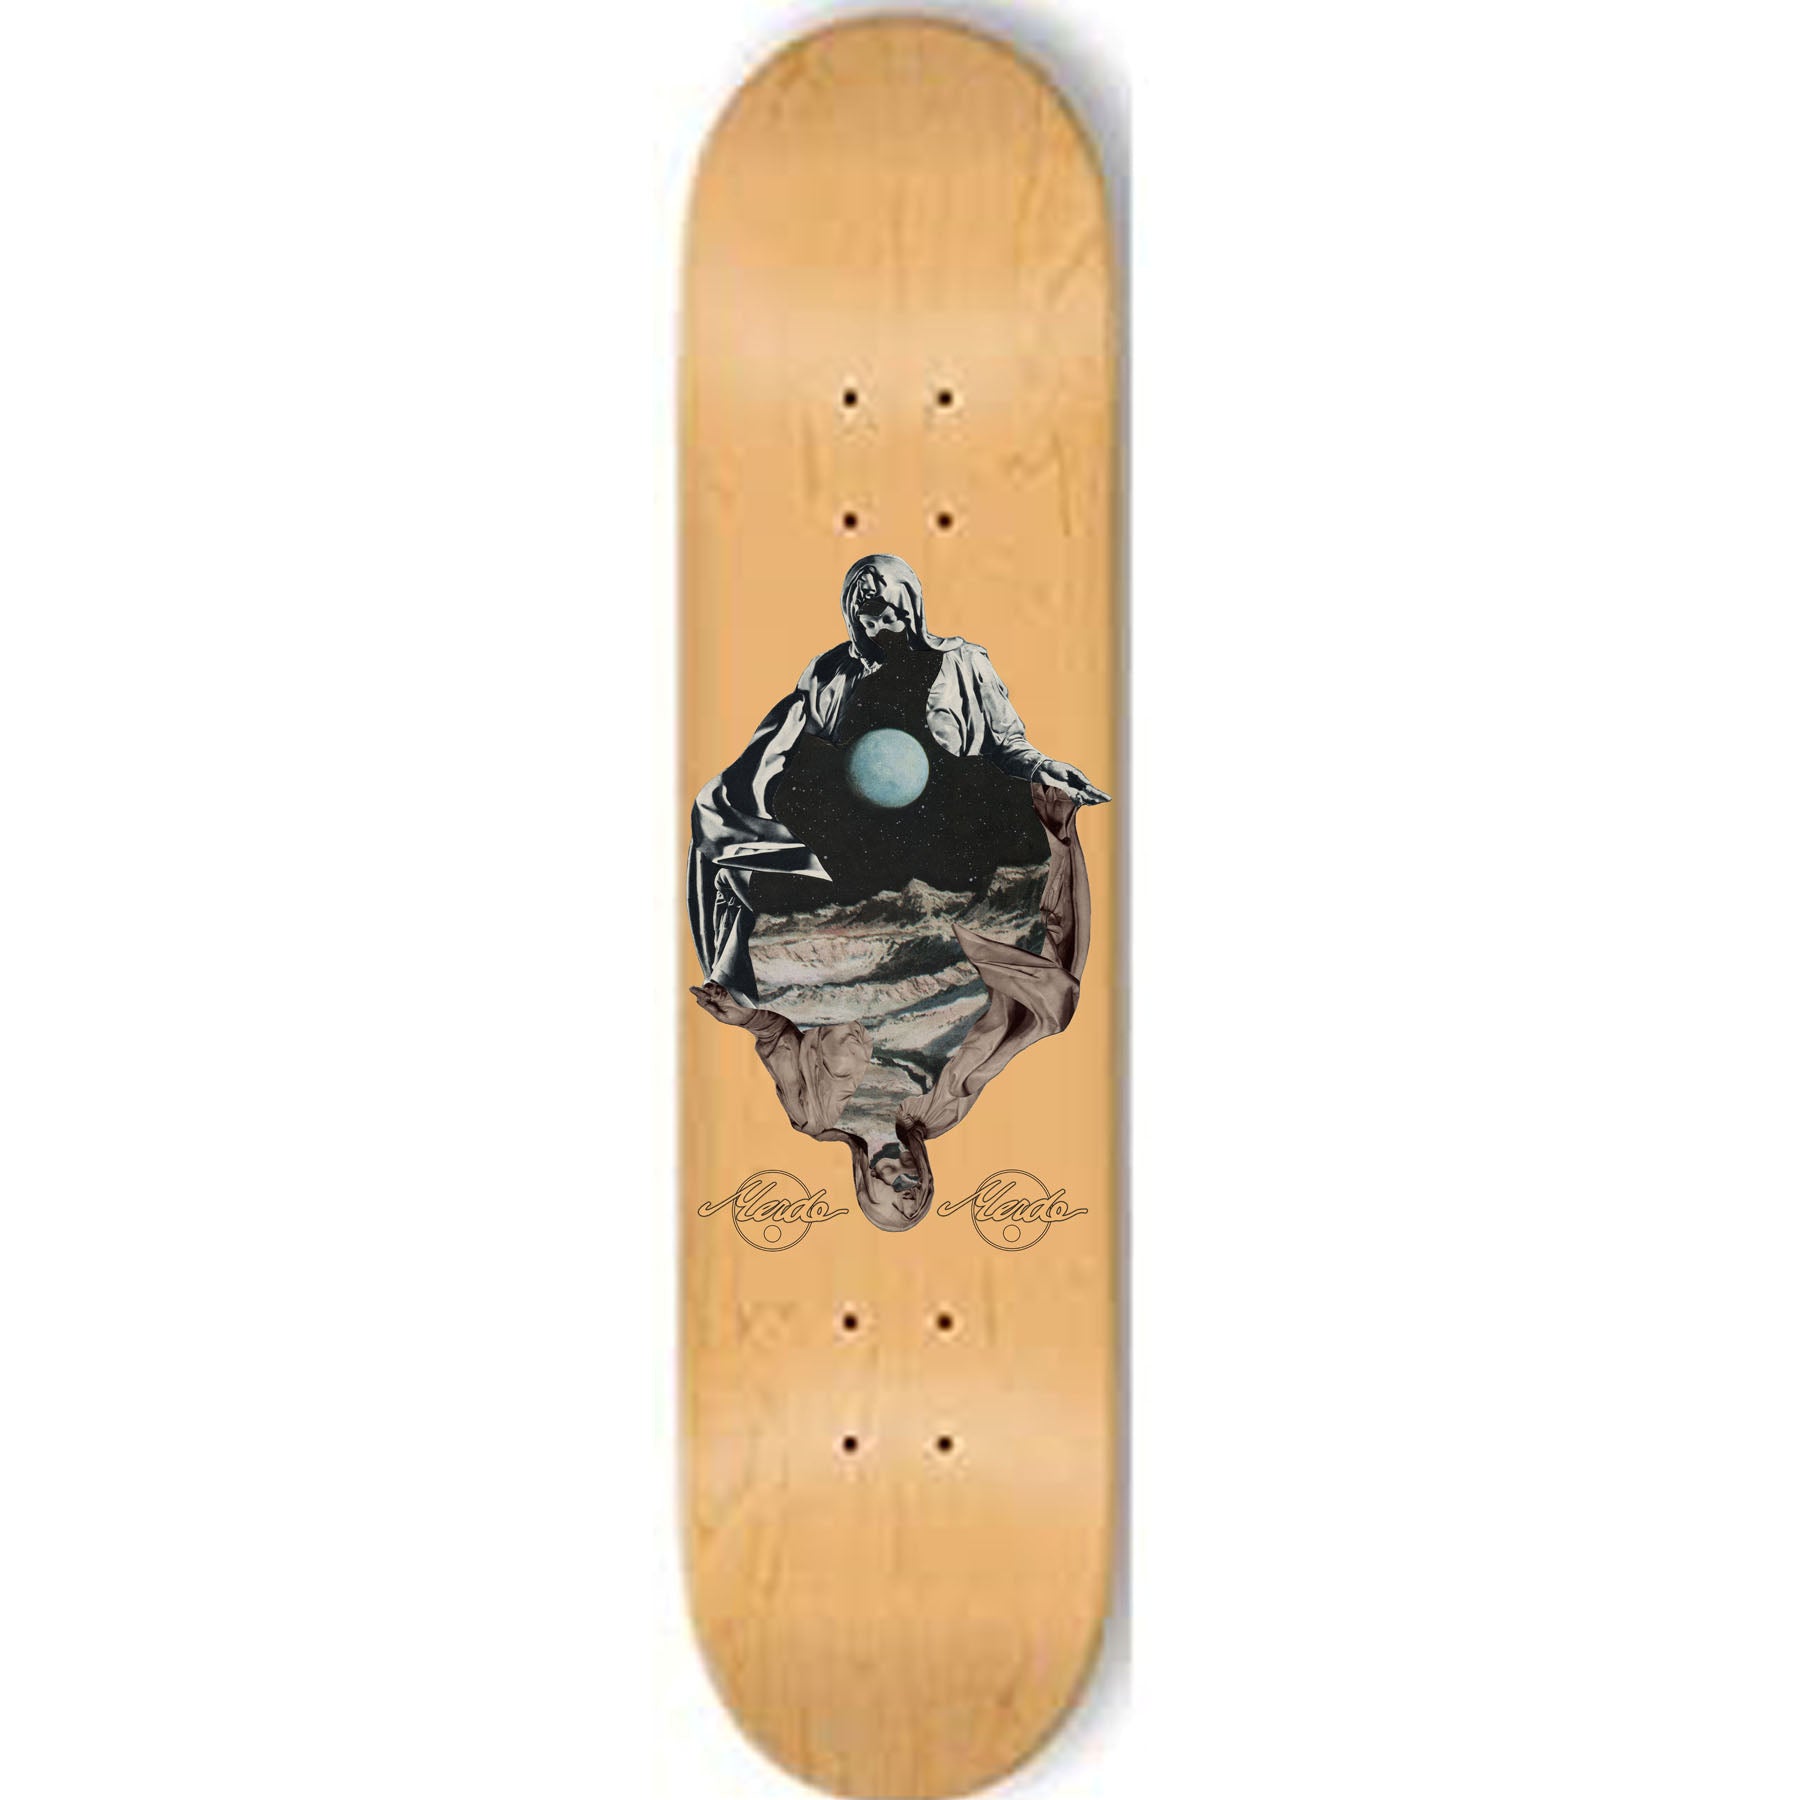 Merde Skateboards "Mike Crespino- Behold the Lamb of God- Ojerum" Assorted Sized Deck